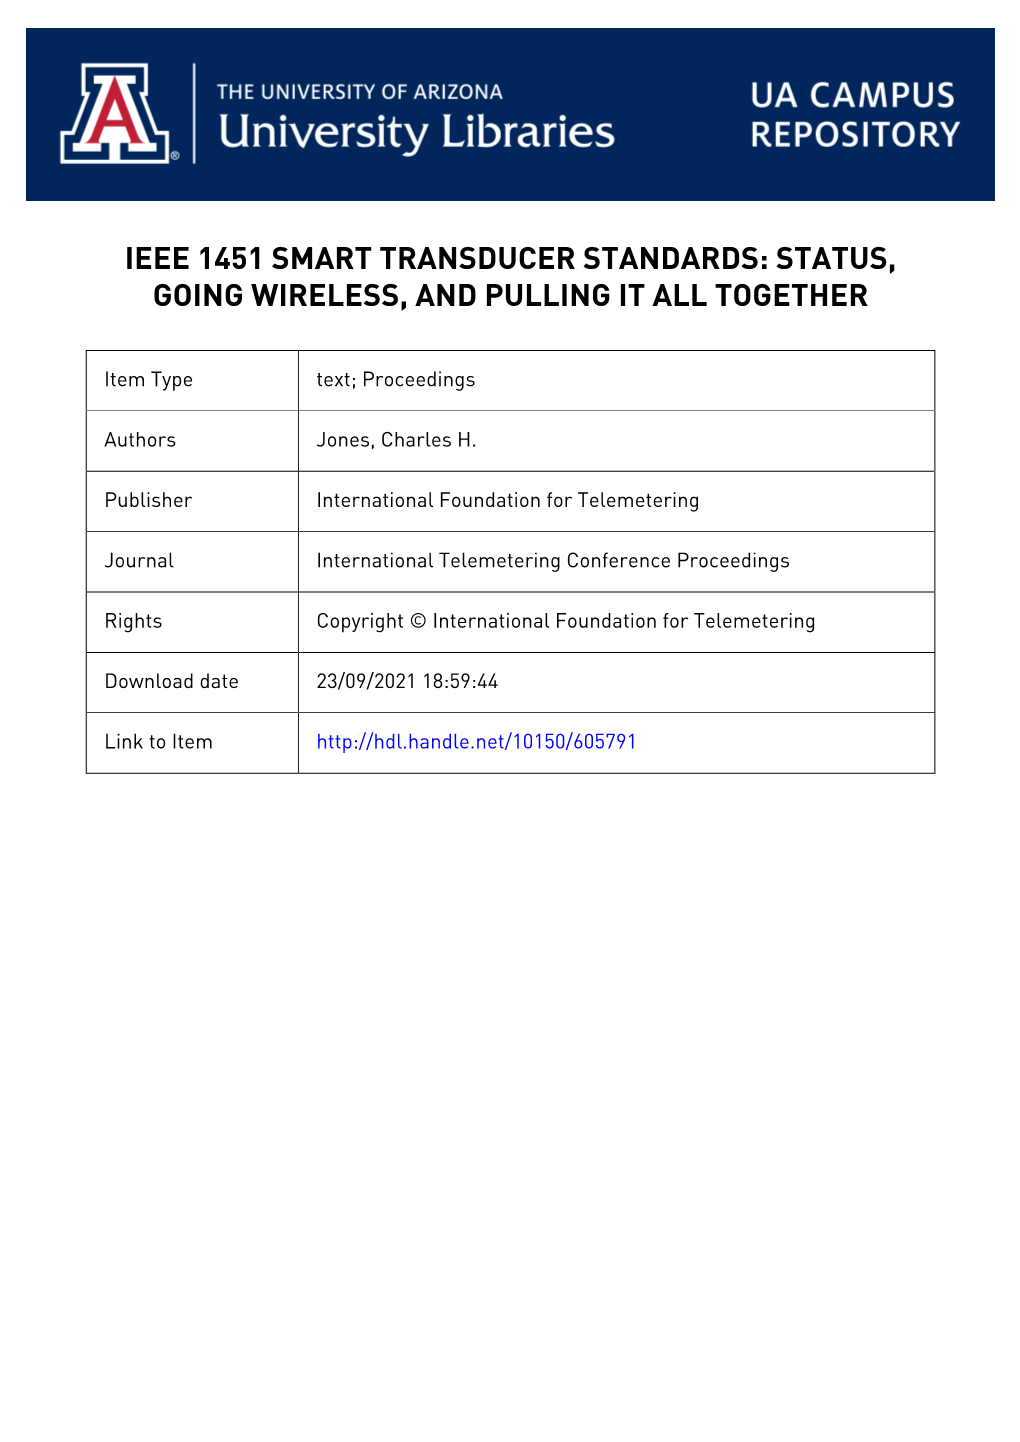 Ieee 1451 Smart Transducer Standards: Status, Going Wireless, and Pulling It All Together